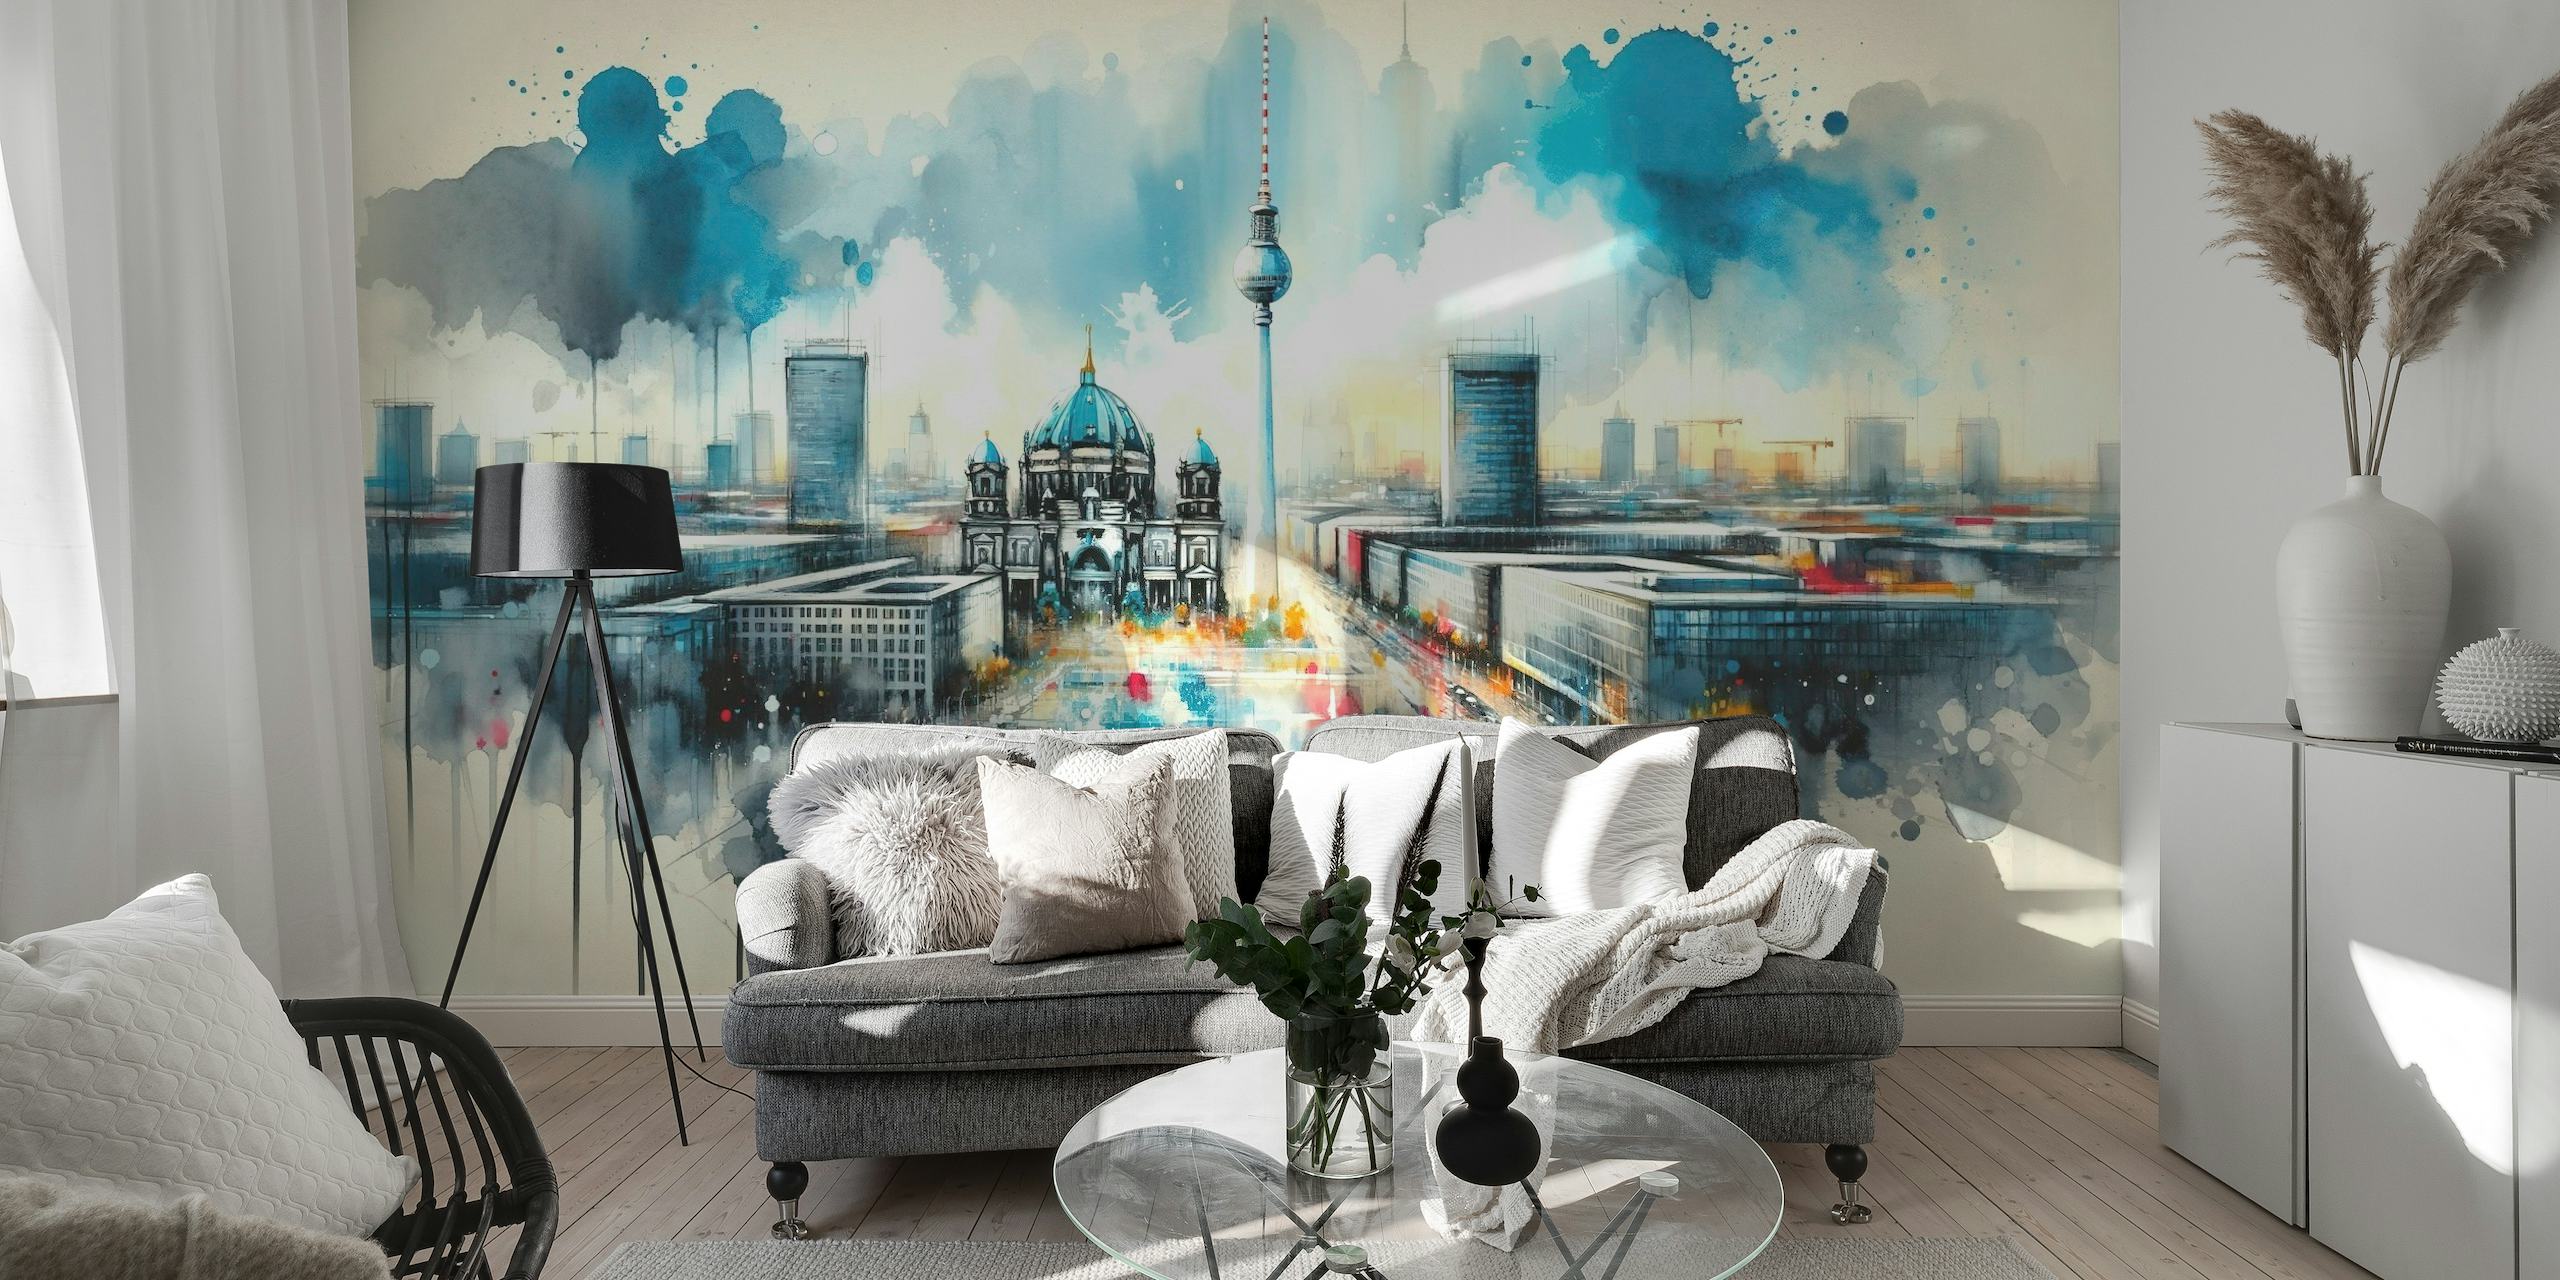 Watercolor mural of Berlin's modern architecture with iconic landmarks and a dynamic, artistic interpretation.